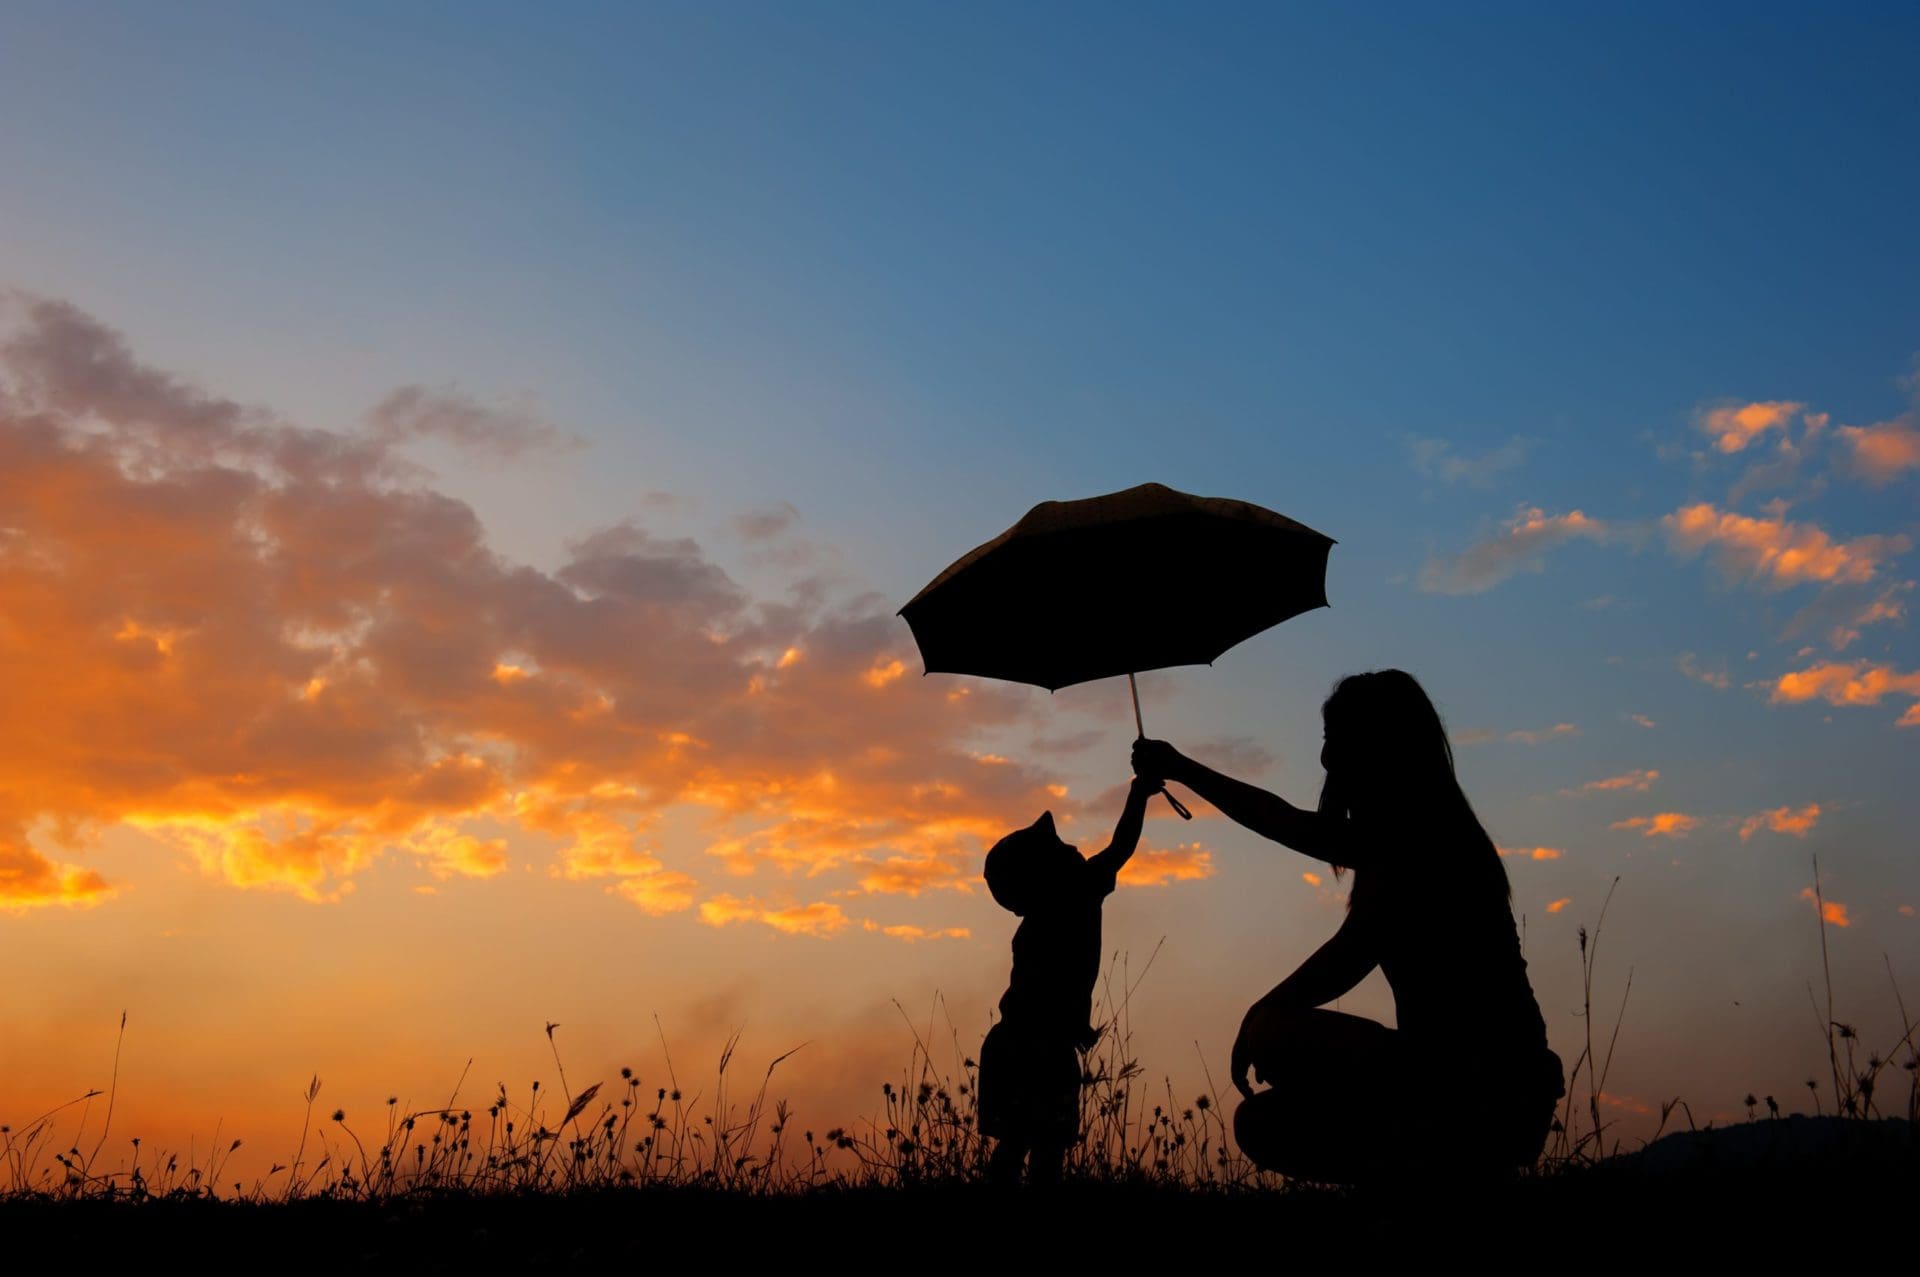 A,Mother,And,Son,Holding,Umbrella,And,Playing,Outdoors,At